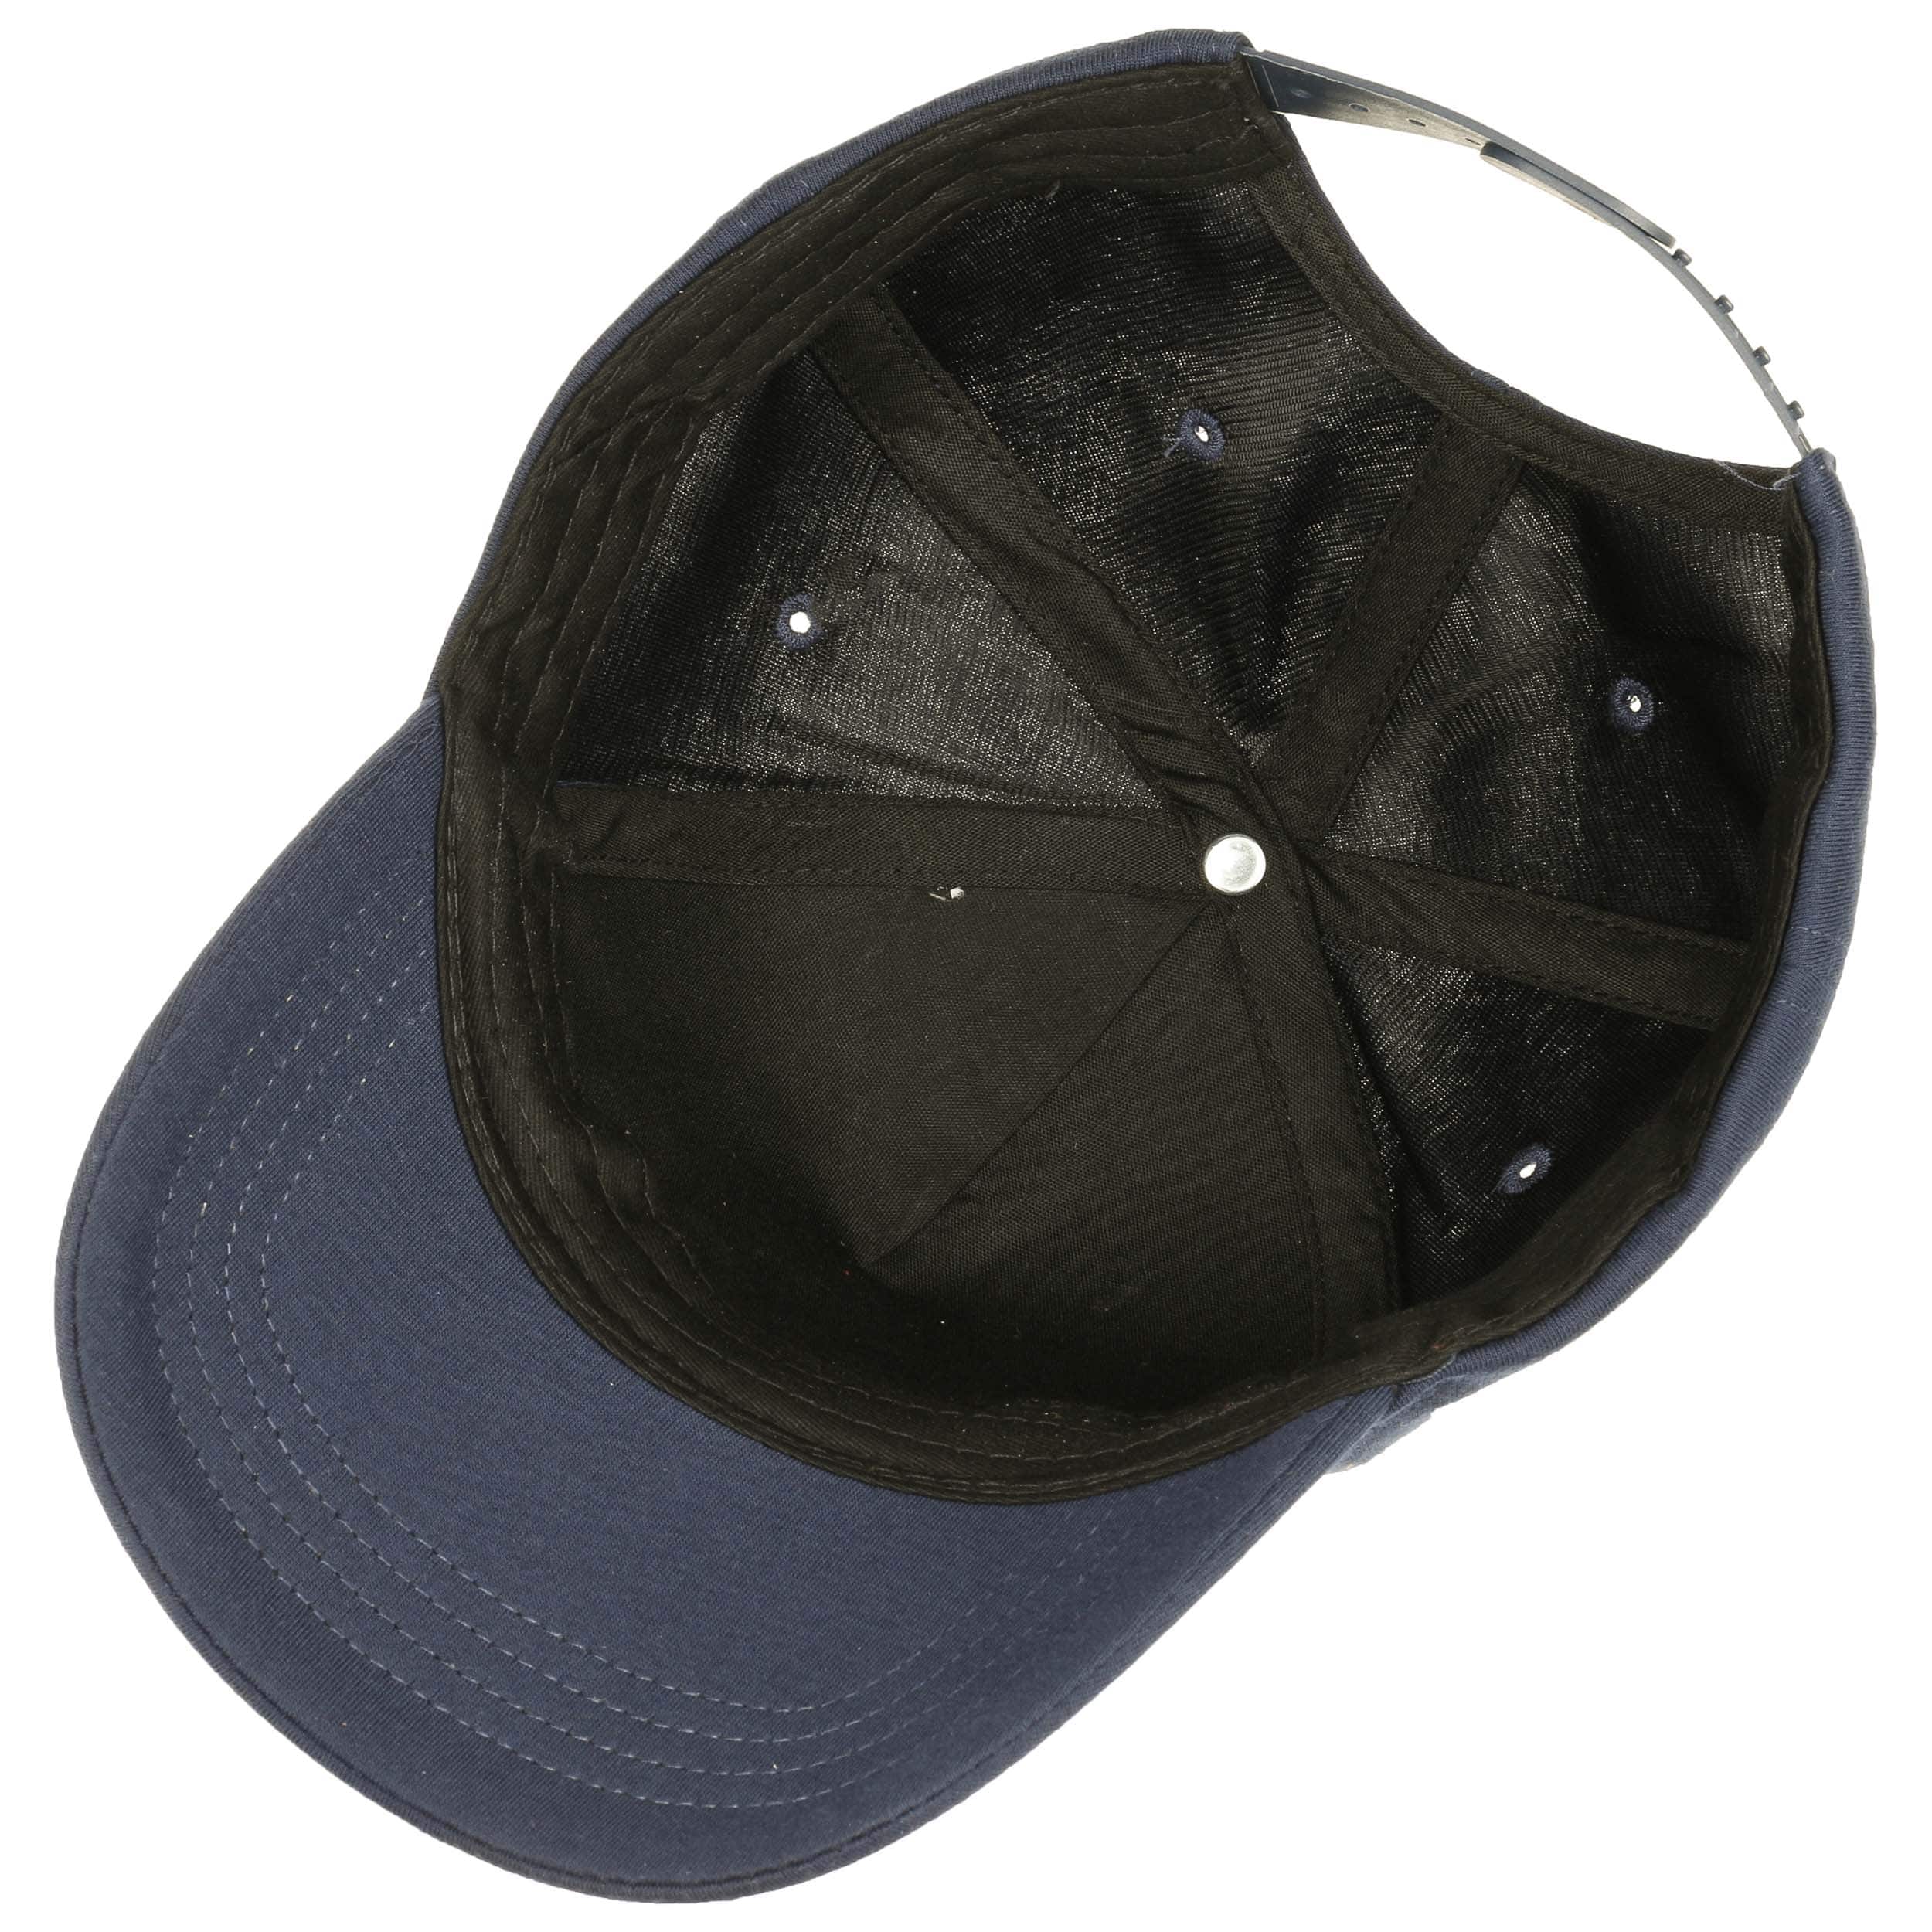 Branded Classic Cap by Bench - 17,95